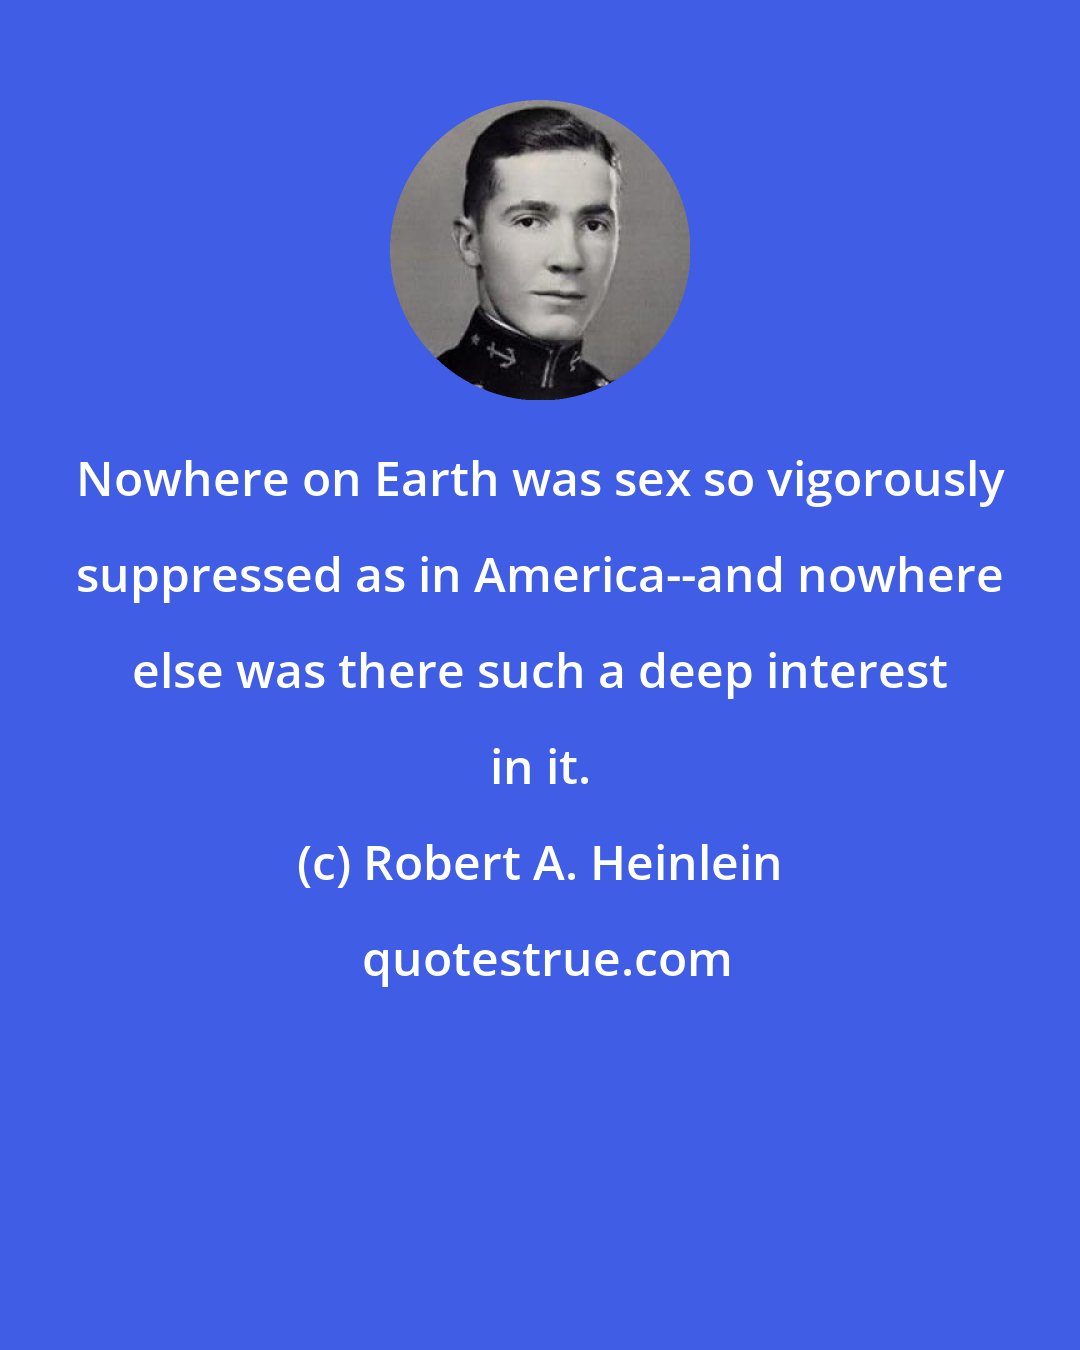 Robert A. Heinlein: Nowhere on Earth was sex so vigorously suppressed as in America--and nowhere else was there such a deep interest in it.